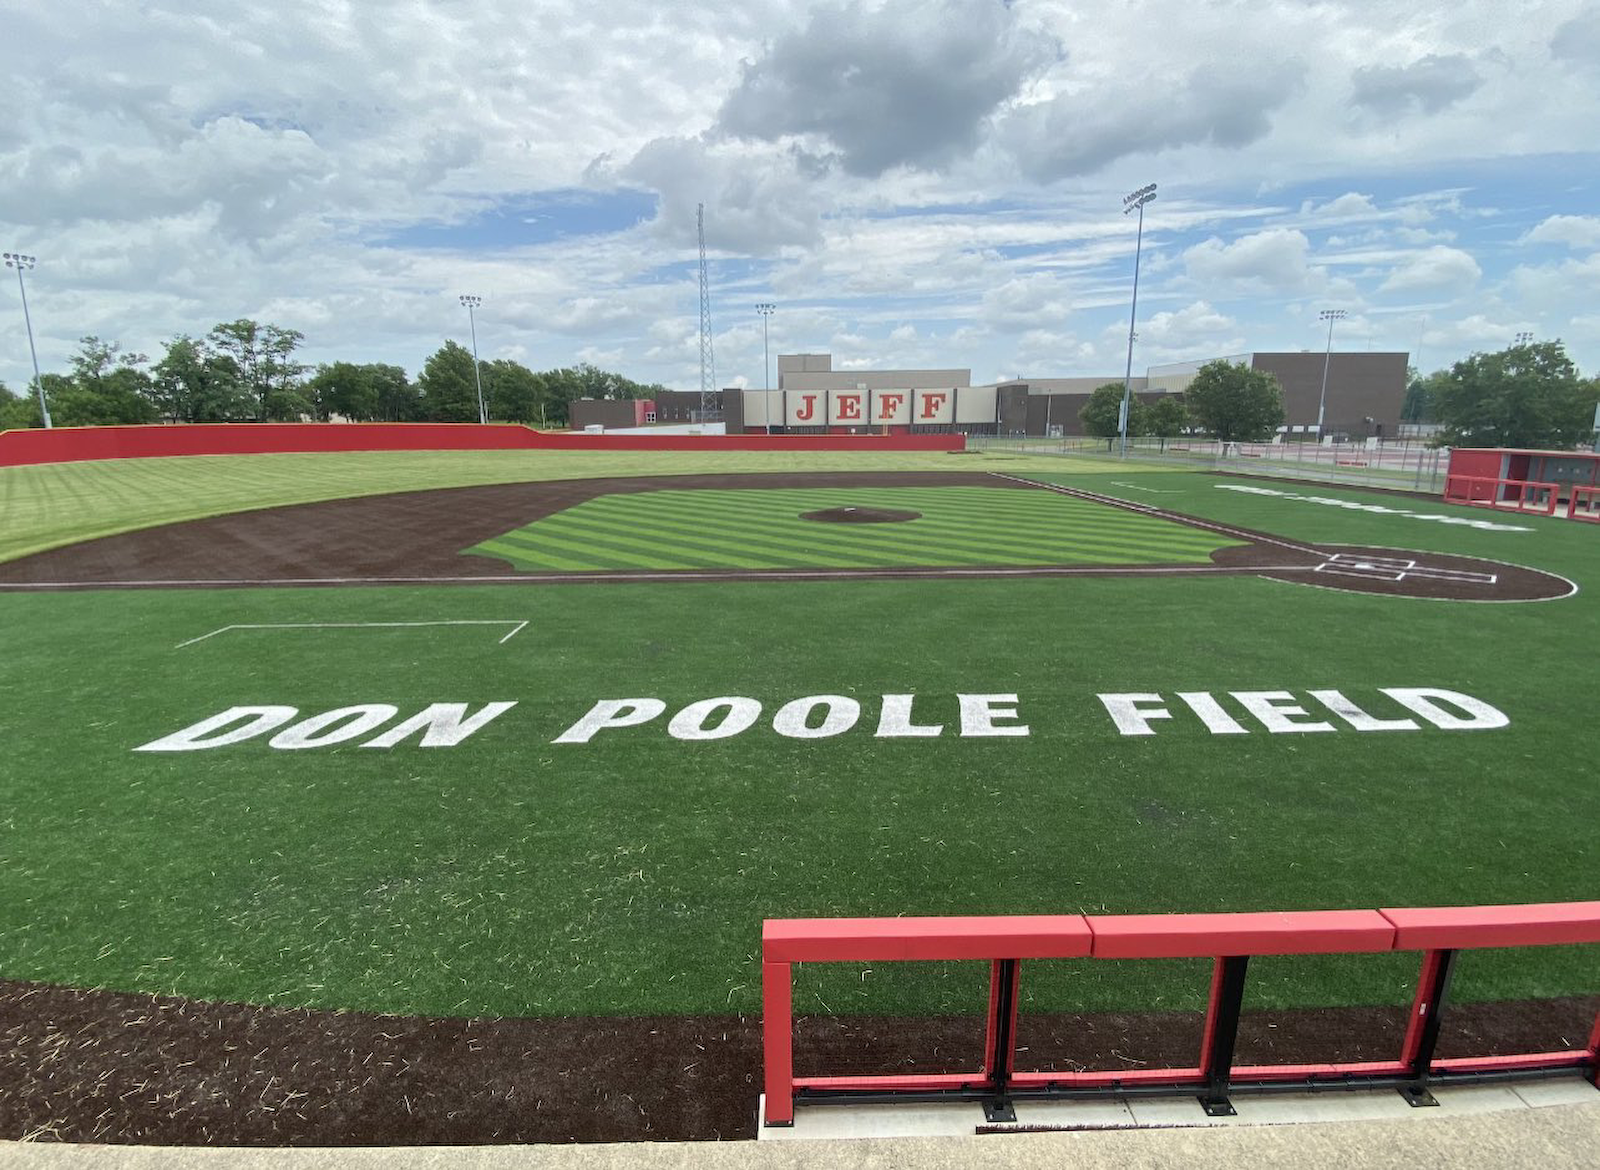 Don Poole Field showcased in HS Baseball Fields of America twitter feed! gallery cover photo